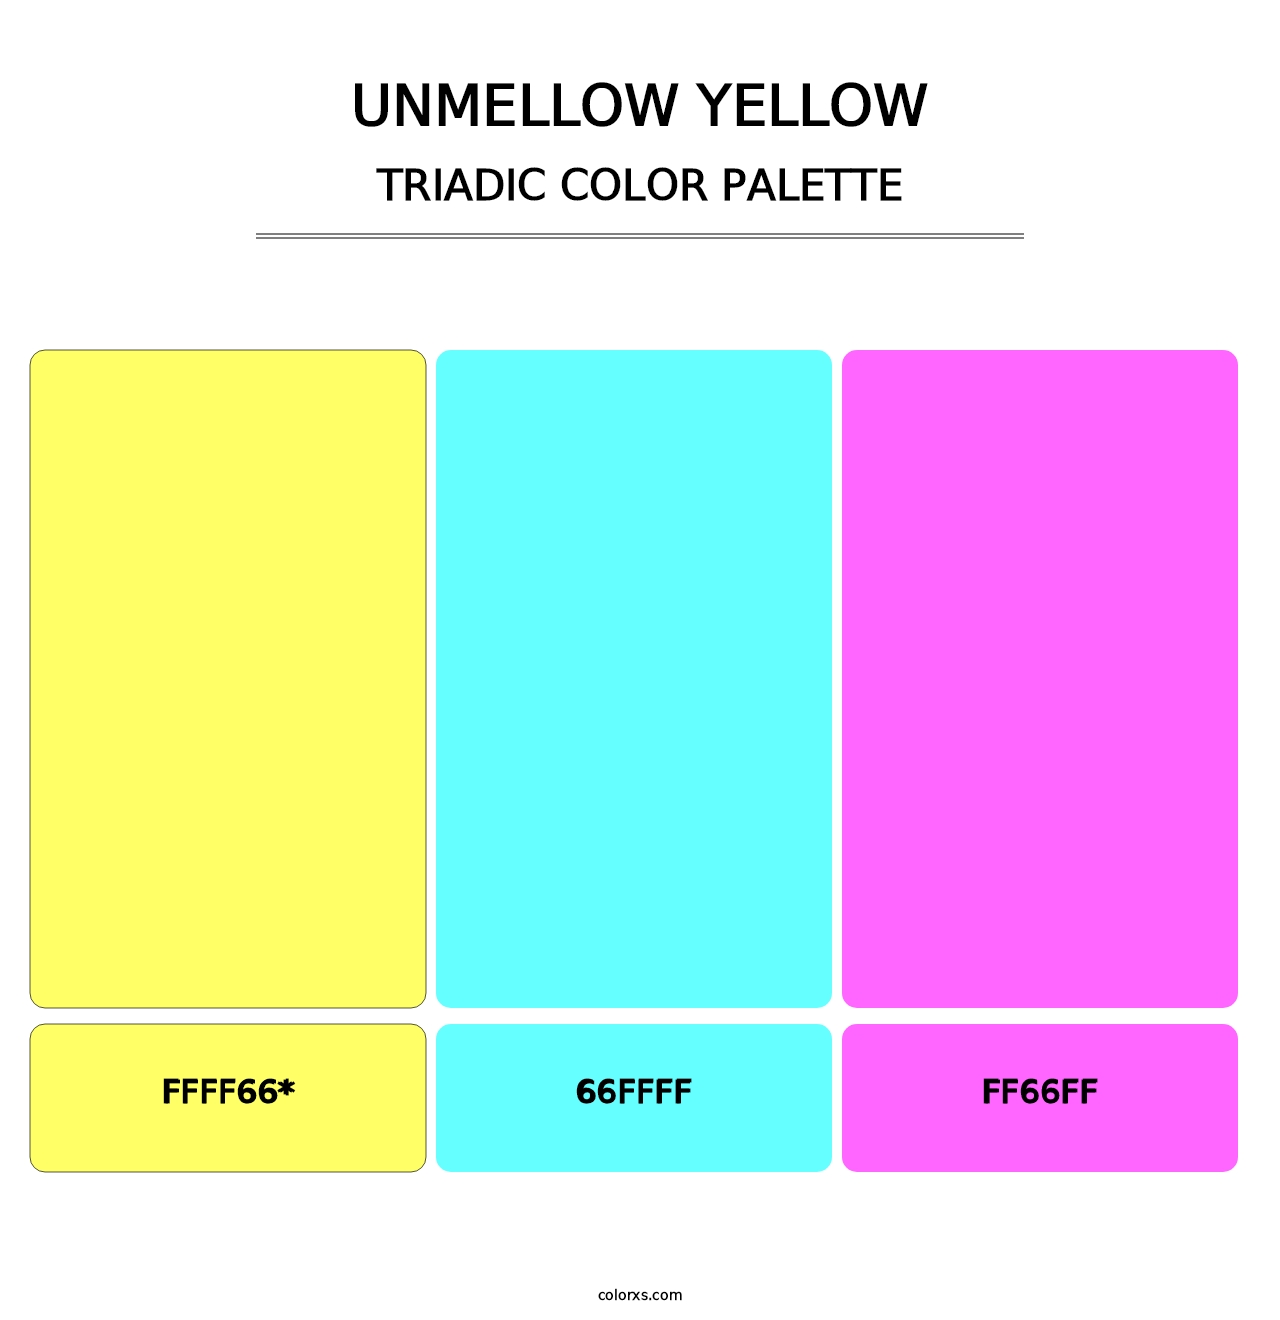 Unmellow Yellow - Triadic Color Palette